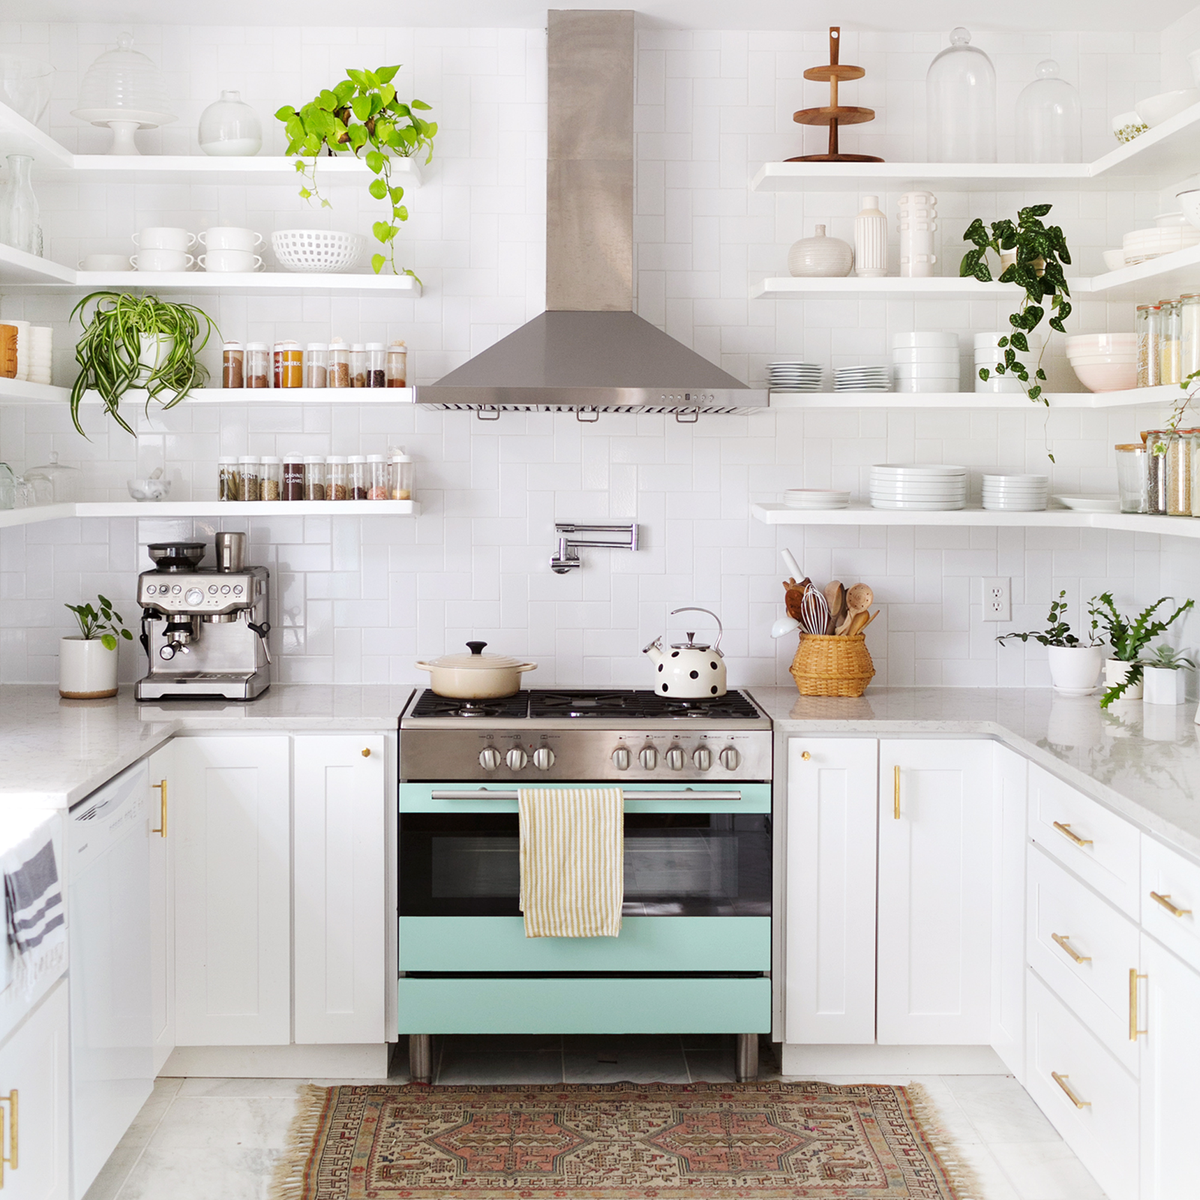 https://hips.hearstapps.com/hmg-prod/images/cheap-kitchen-organizing-tips-2-1561141452.png?crop=1xw:1xh;center,top&resize=1200:*